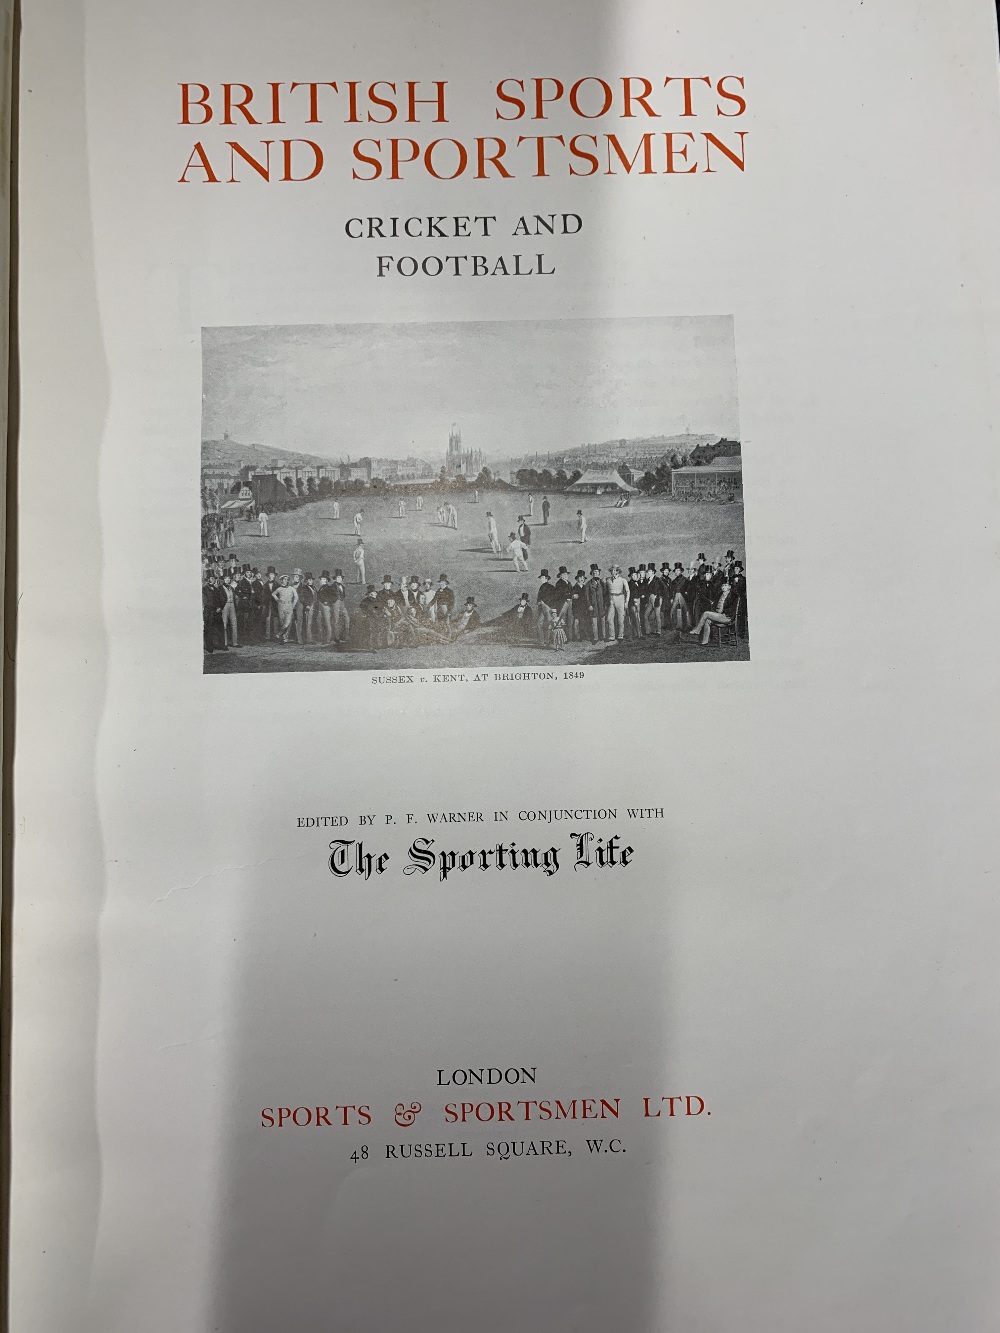 Books: "British Sports and Sportsmen" cricket and football edited by P.F. Warner in conjunction with